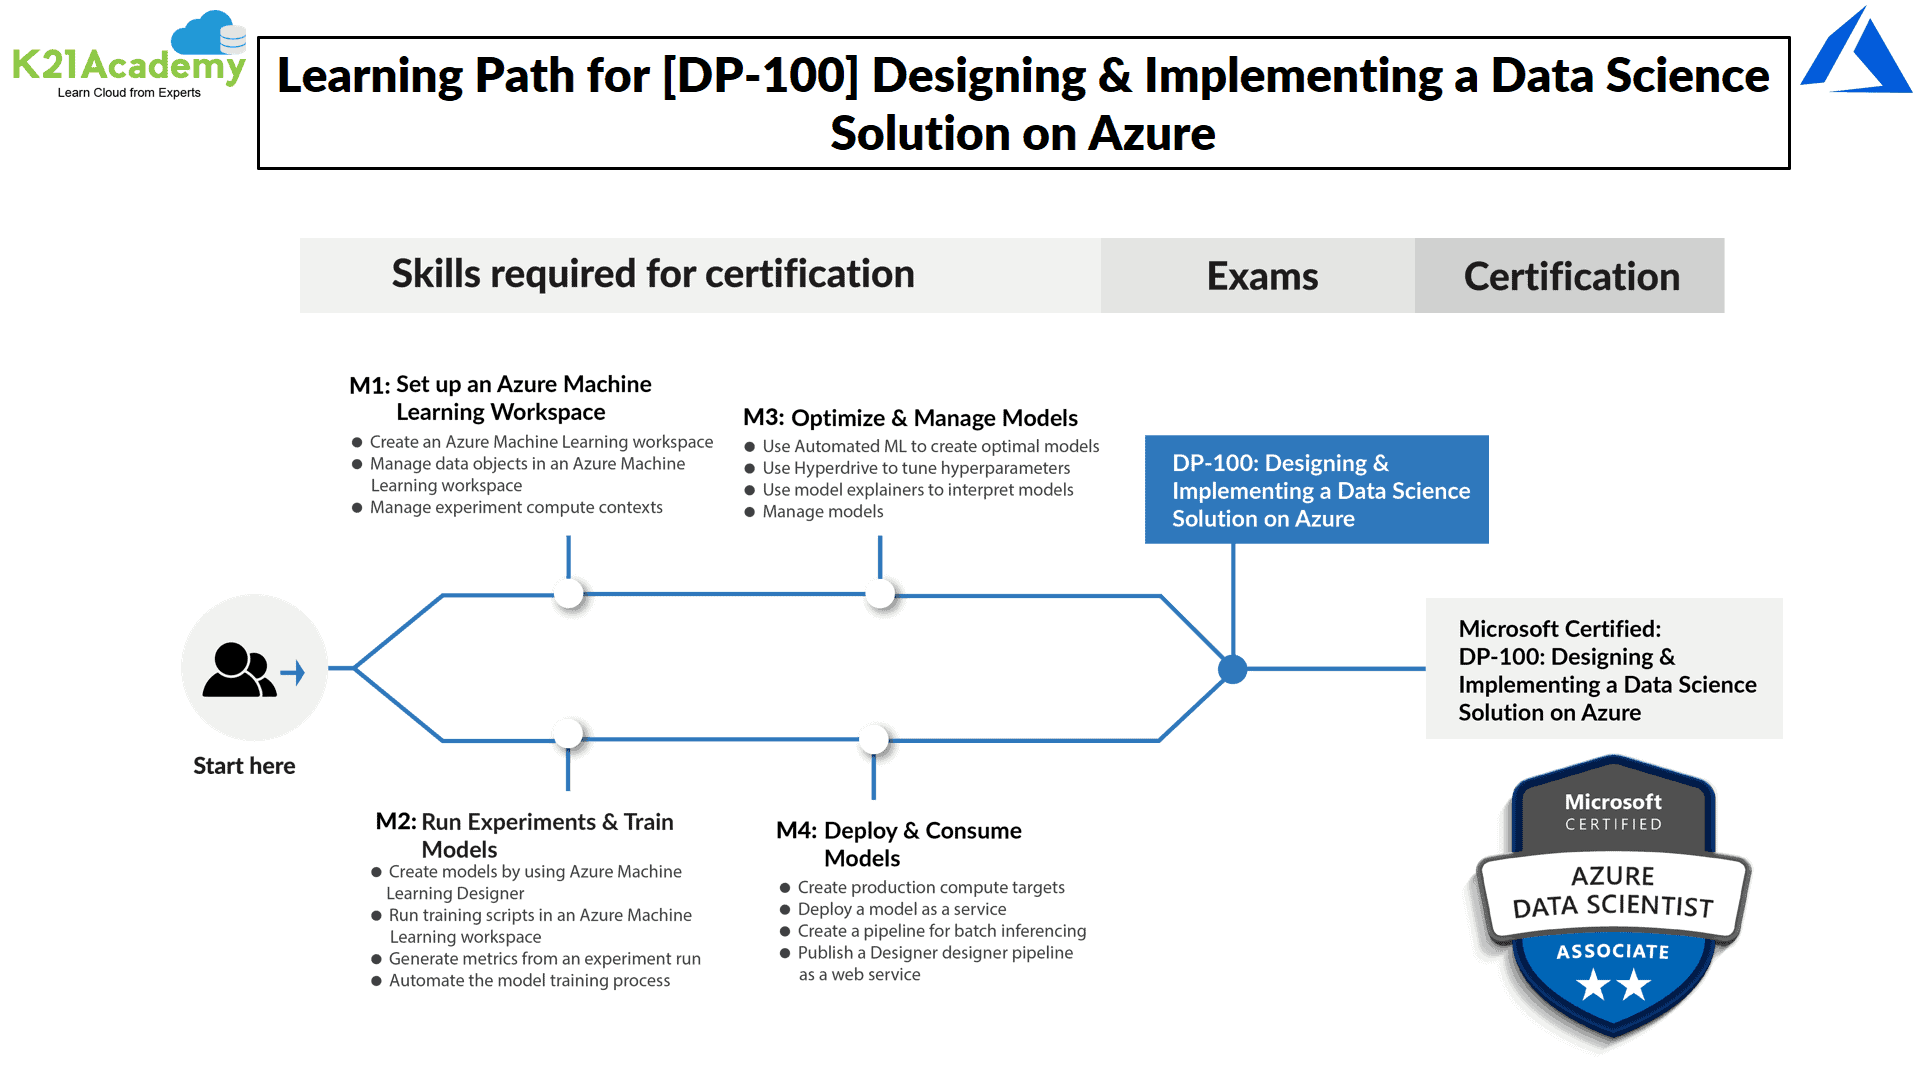 DP-100 learning path